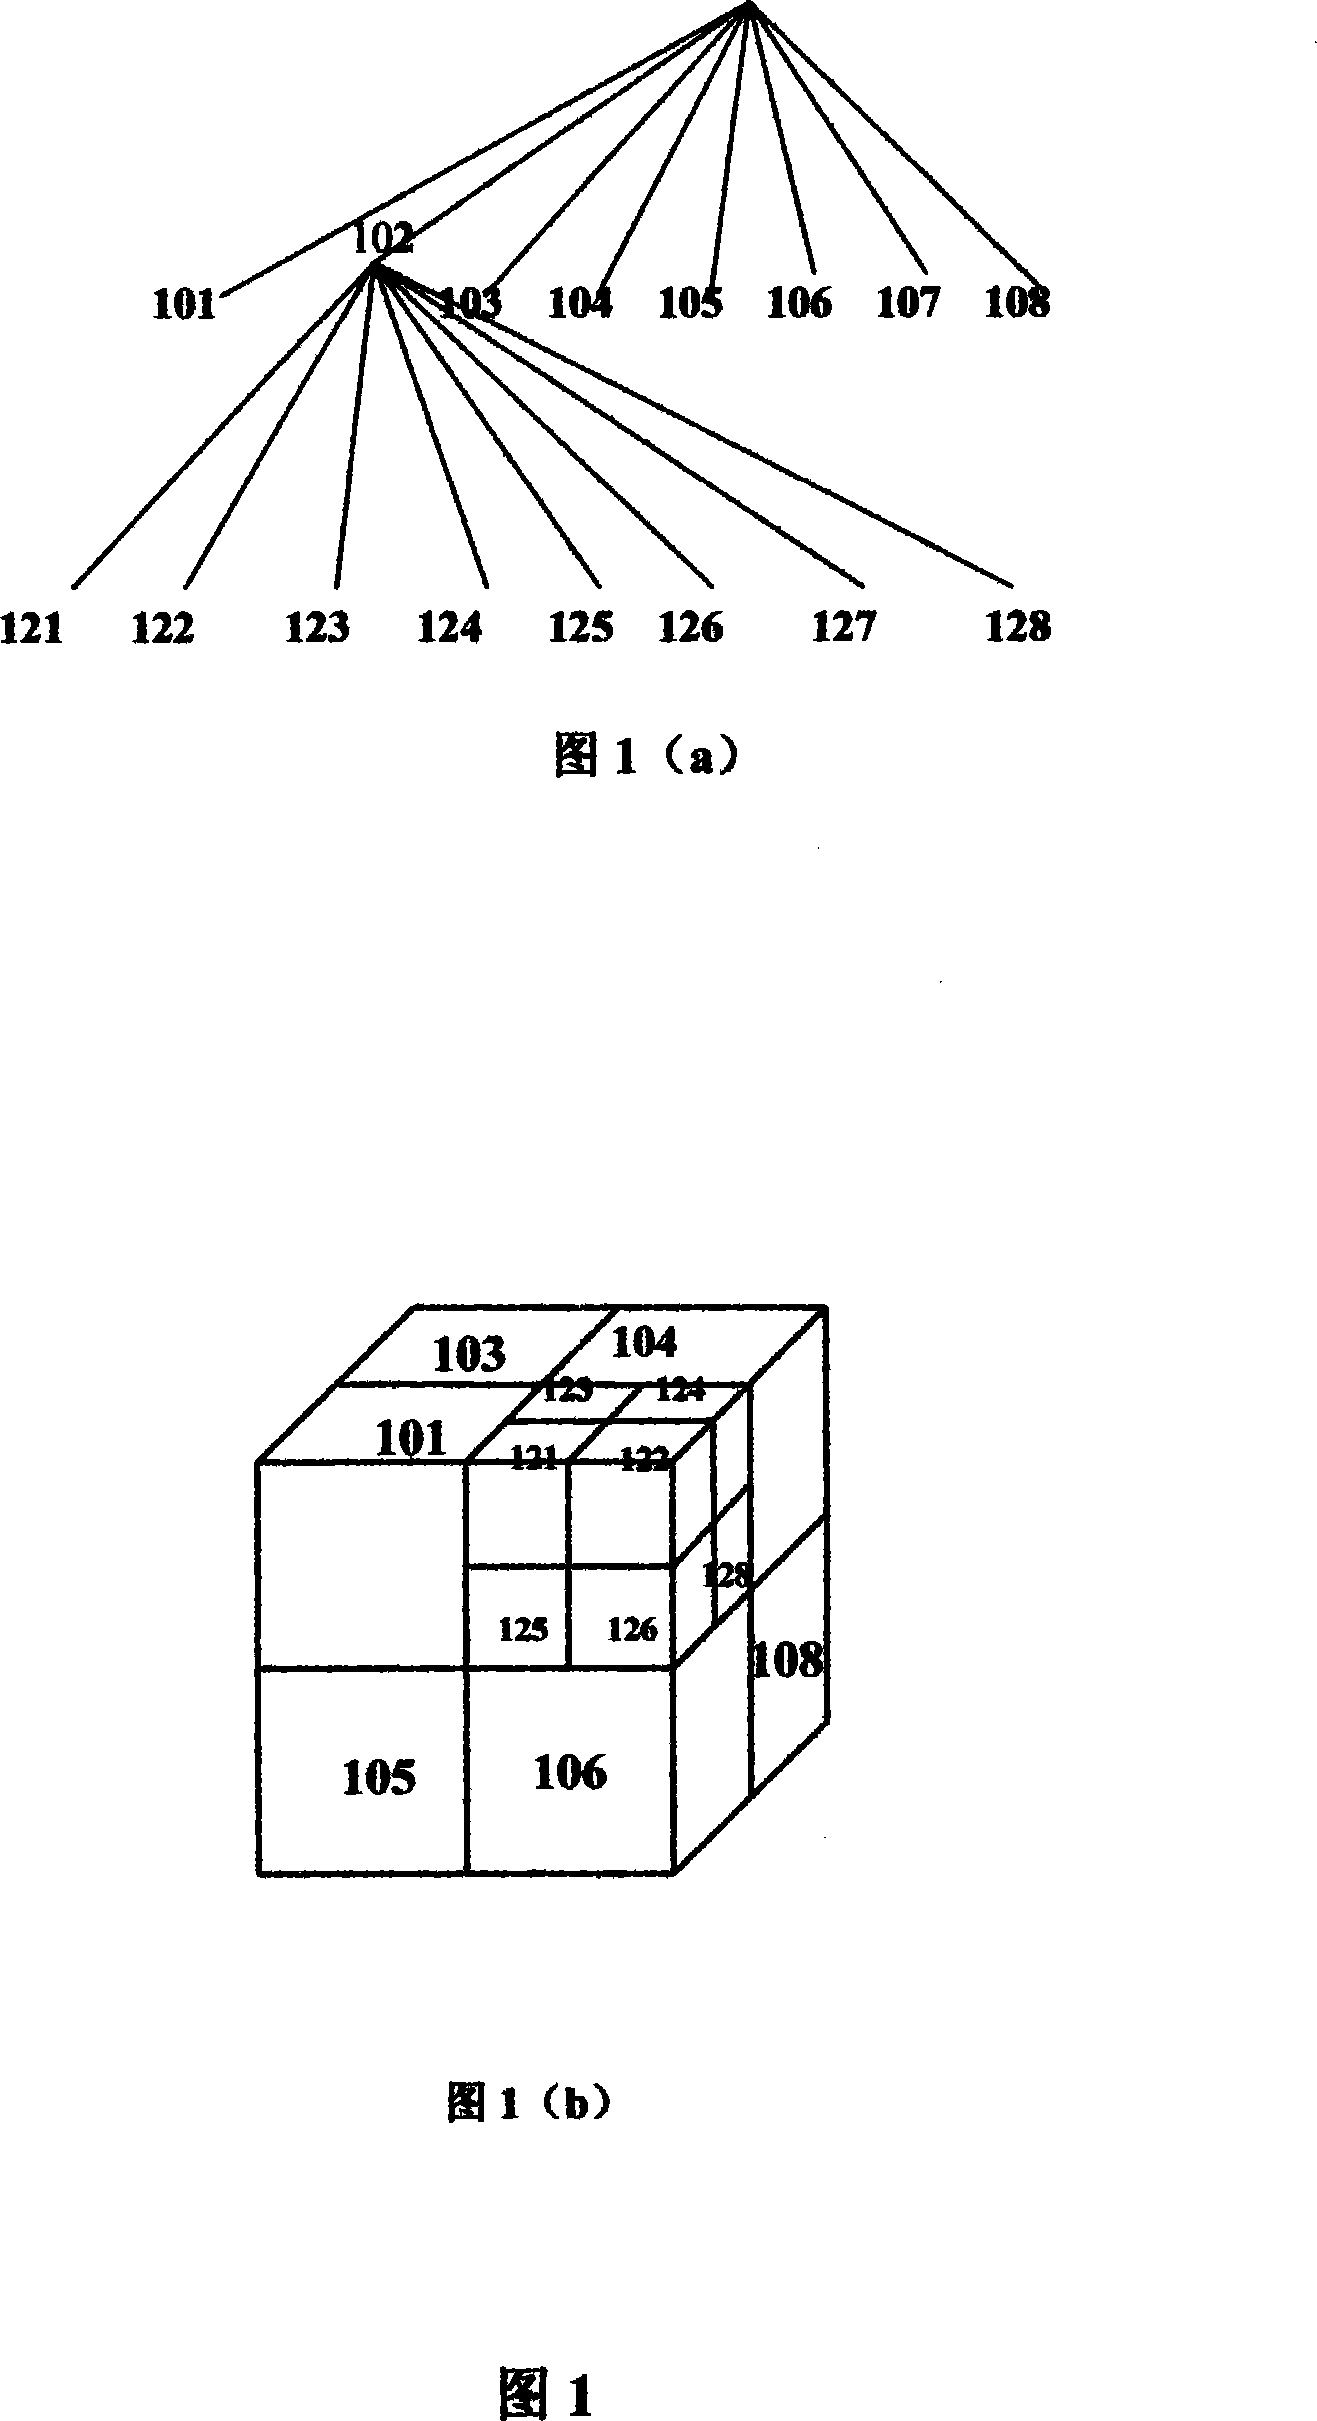 Method, device and system for constructing multi-dimensional address